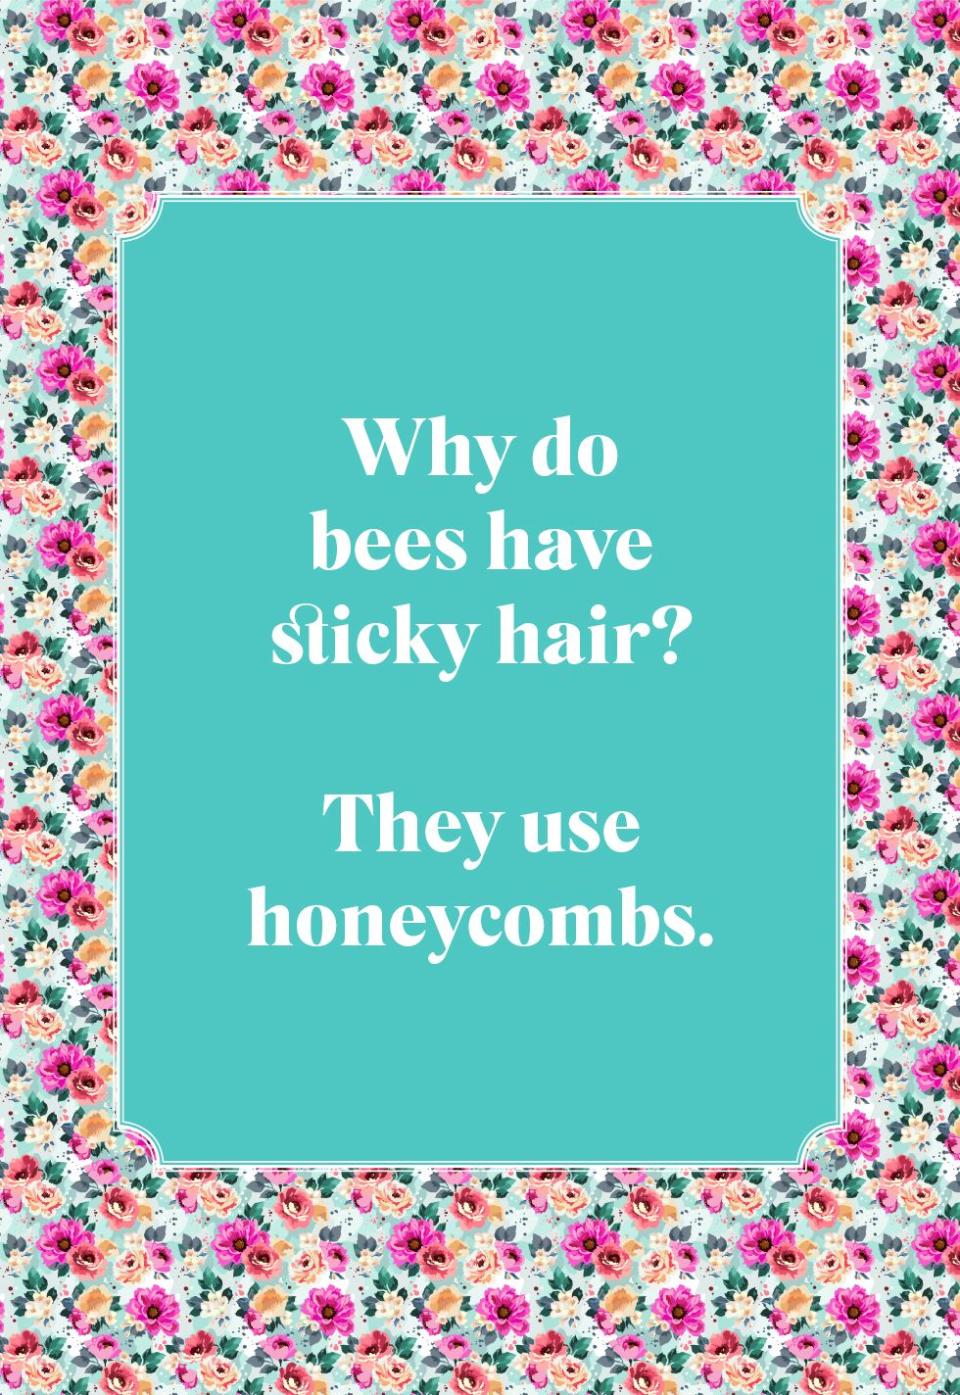 Why do bees have sticky hair?